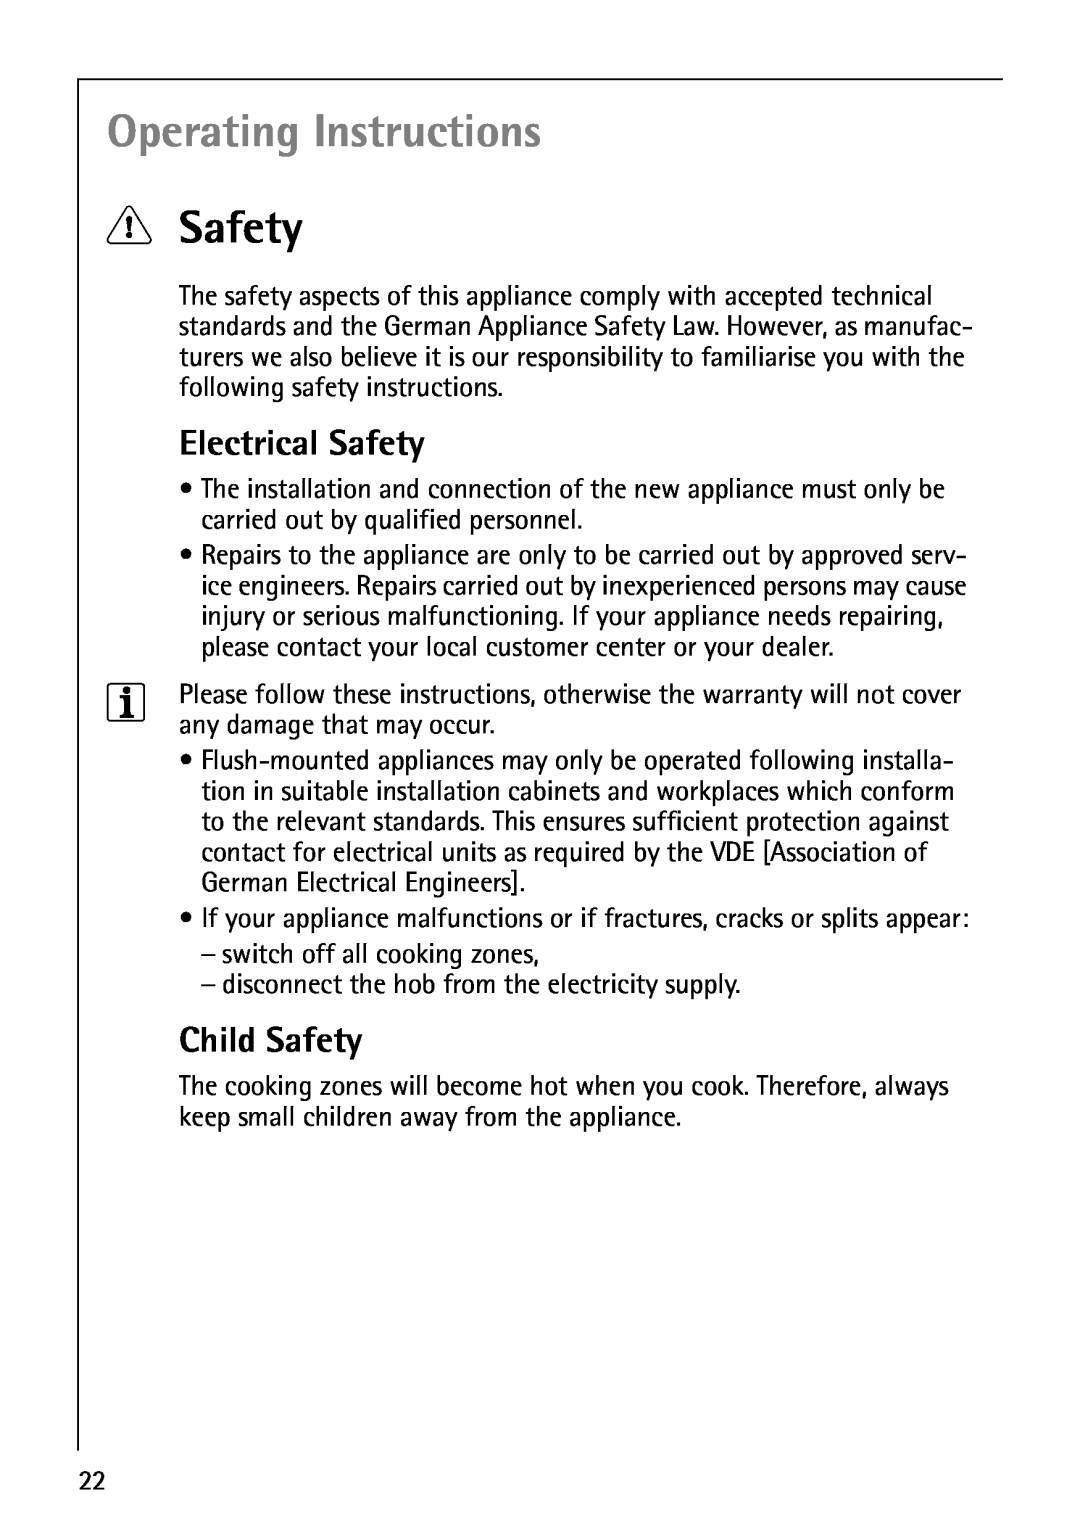 AEG 61000M manual Operating Instructions, 1Safety, Electrical Safety, Child Safety 